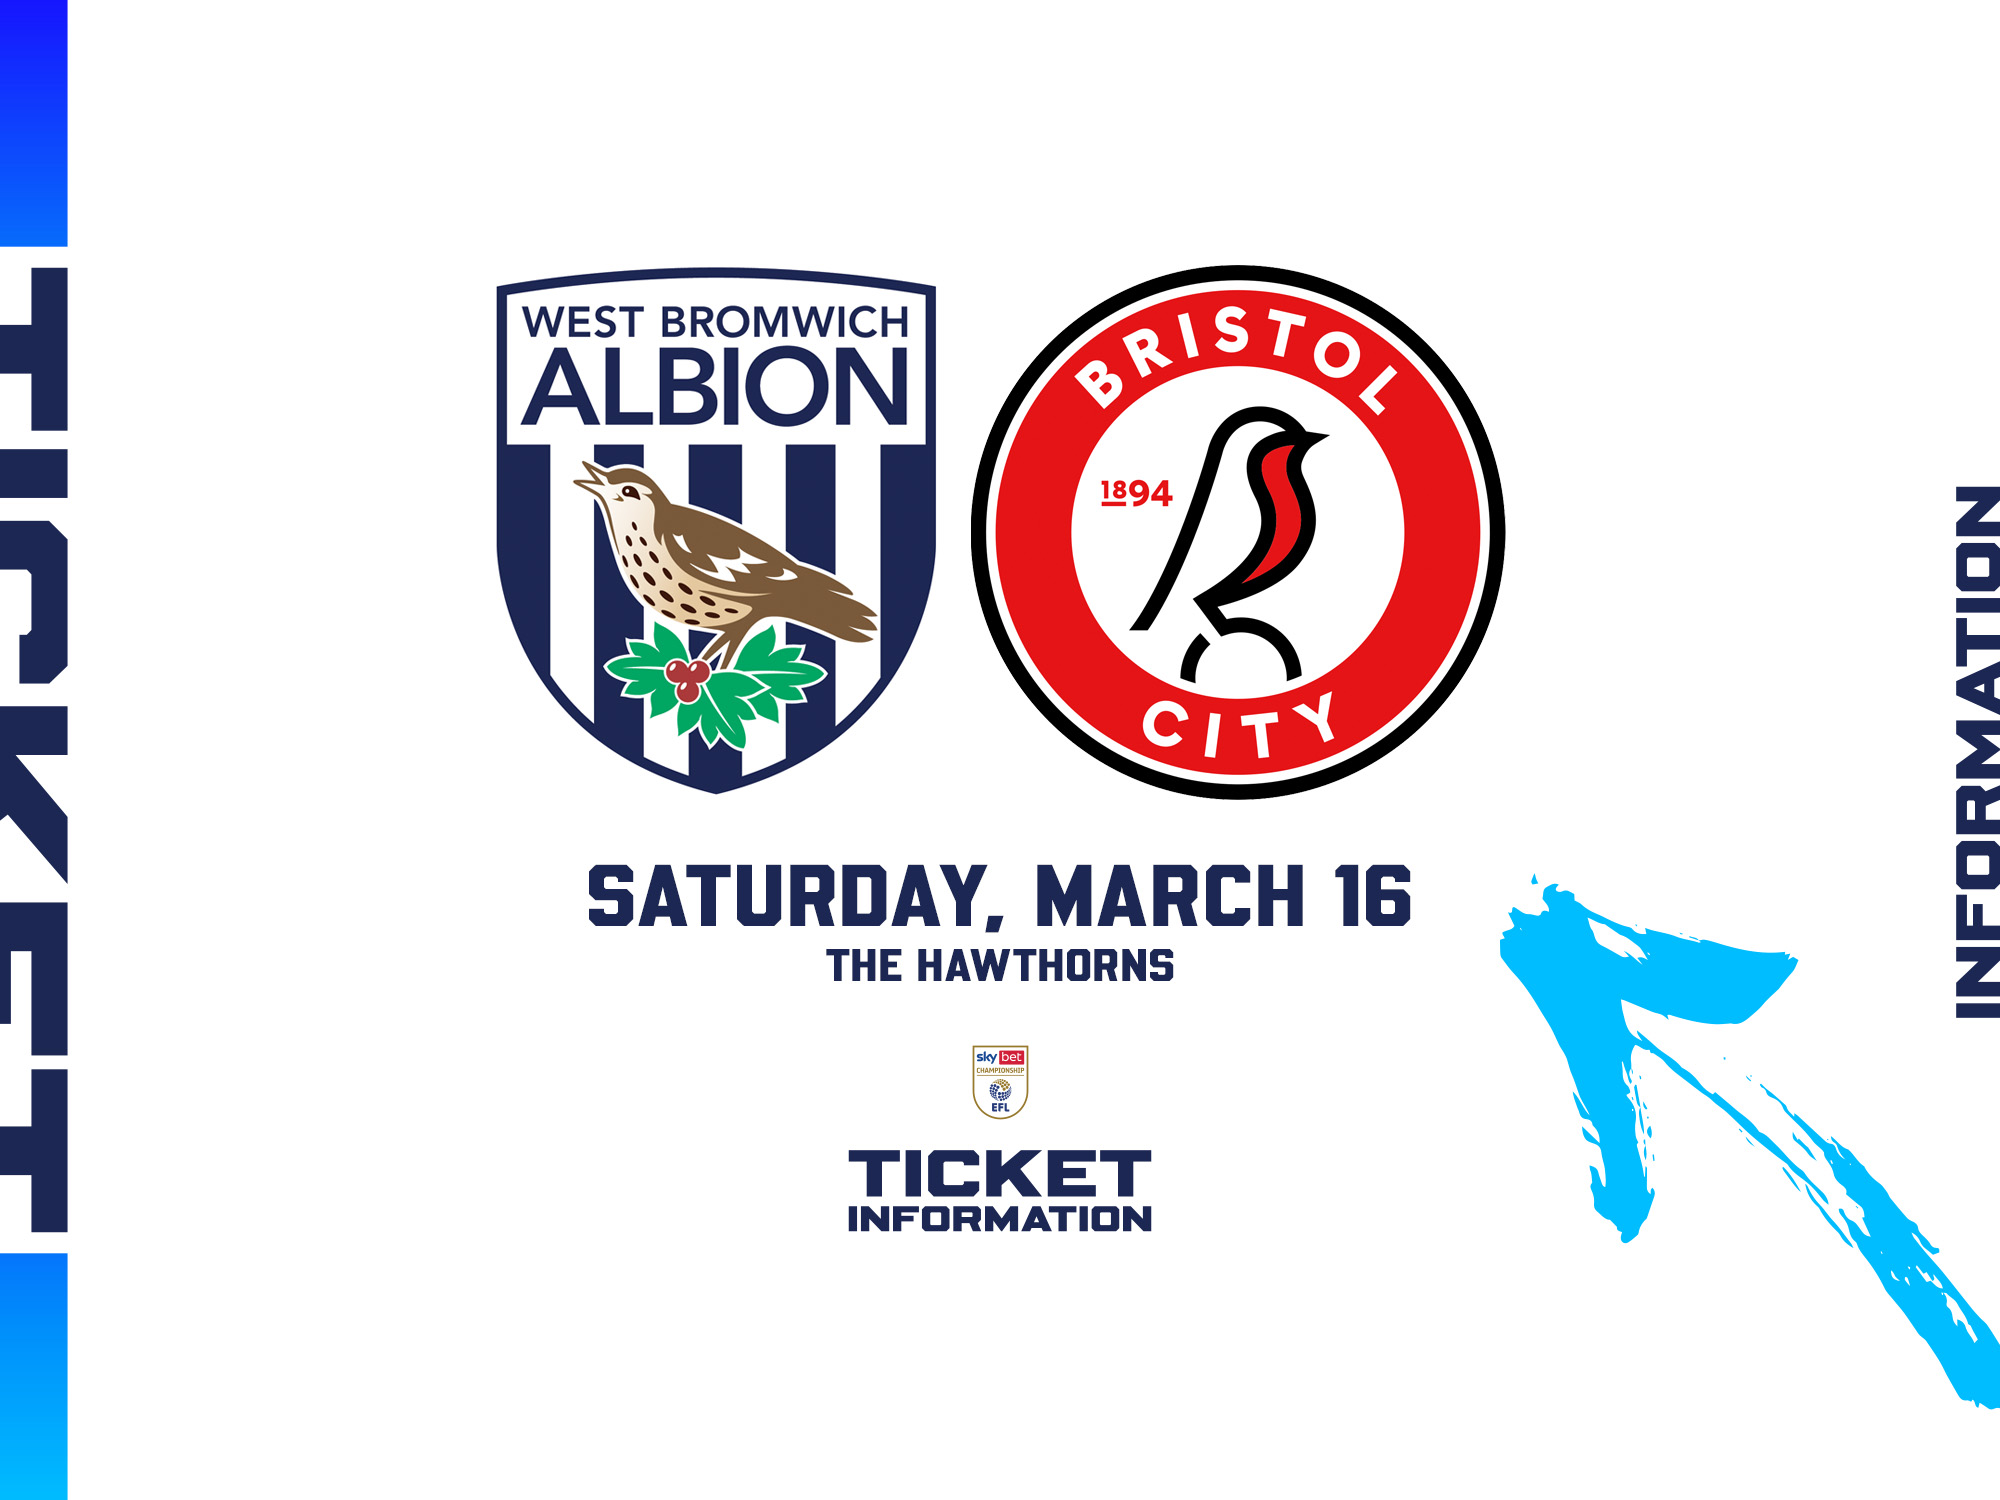 WBA and Bristol City badges on the home ticket graphic 